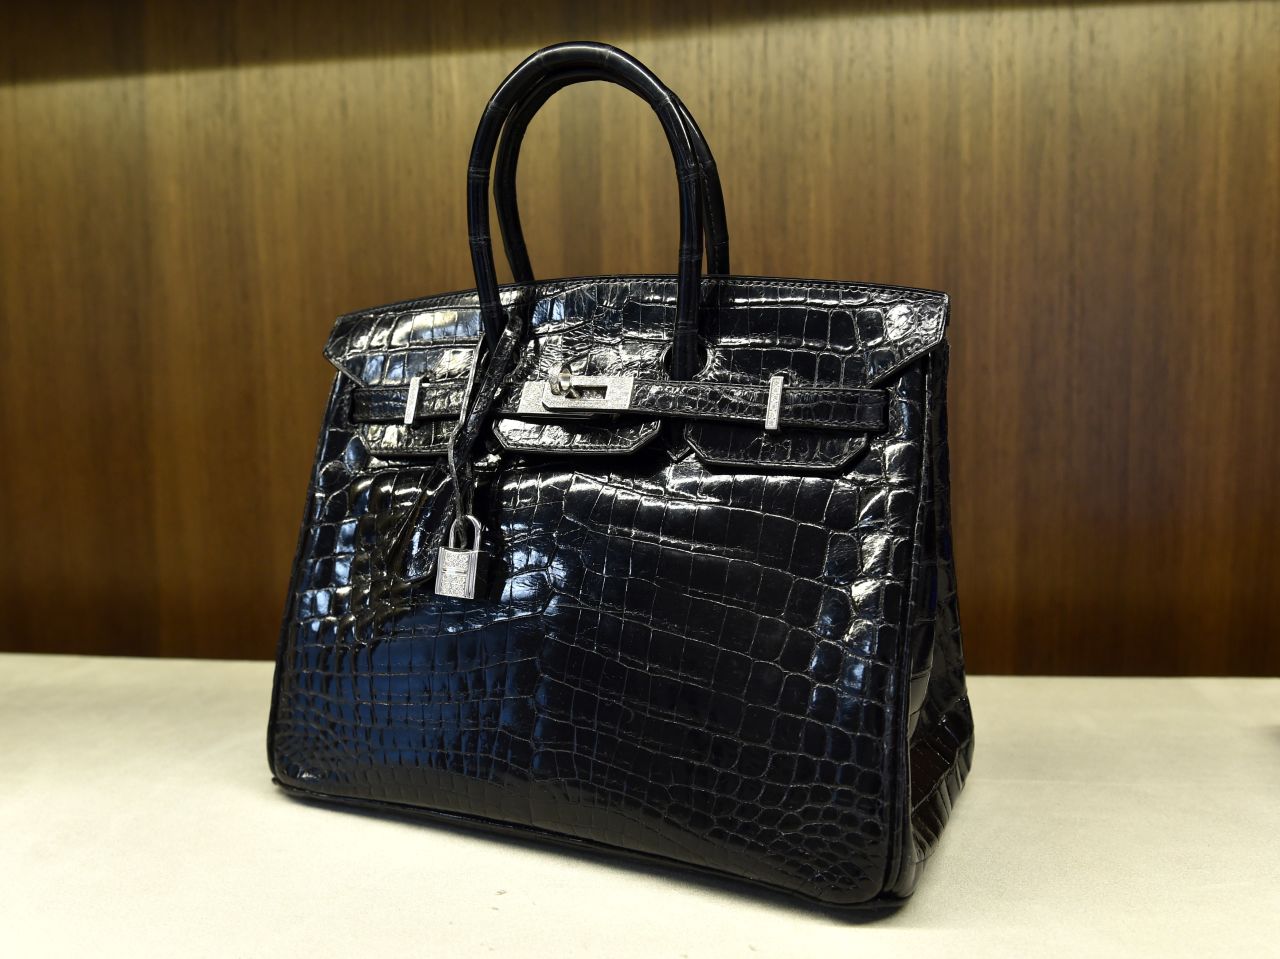 A shiny black crocodile Birkin bag is displayed in New York in 2014. Michael Cohen's plea said he failed to report proceeds of a similar bag.